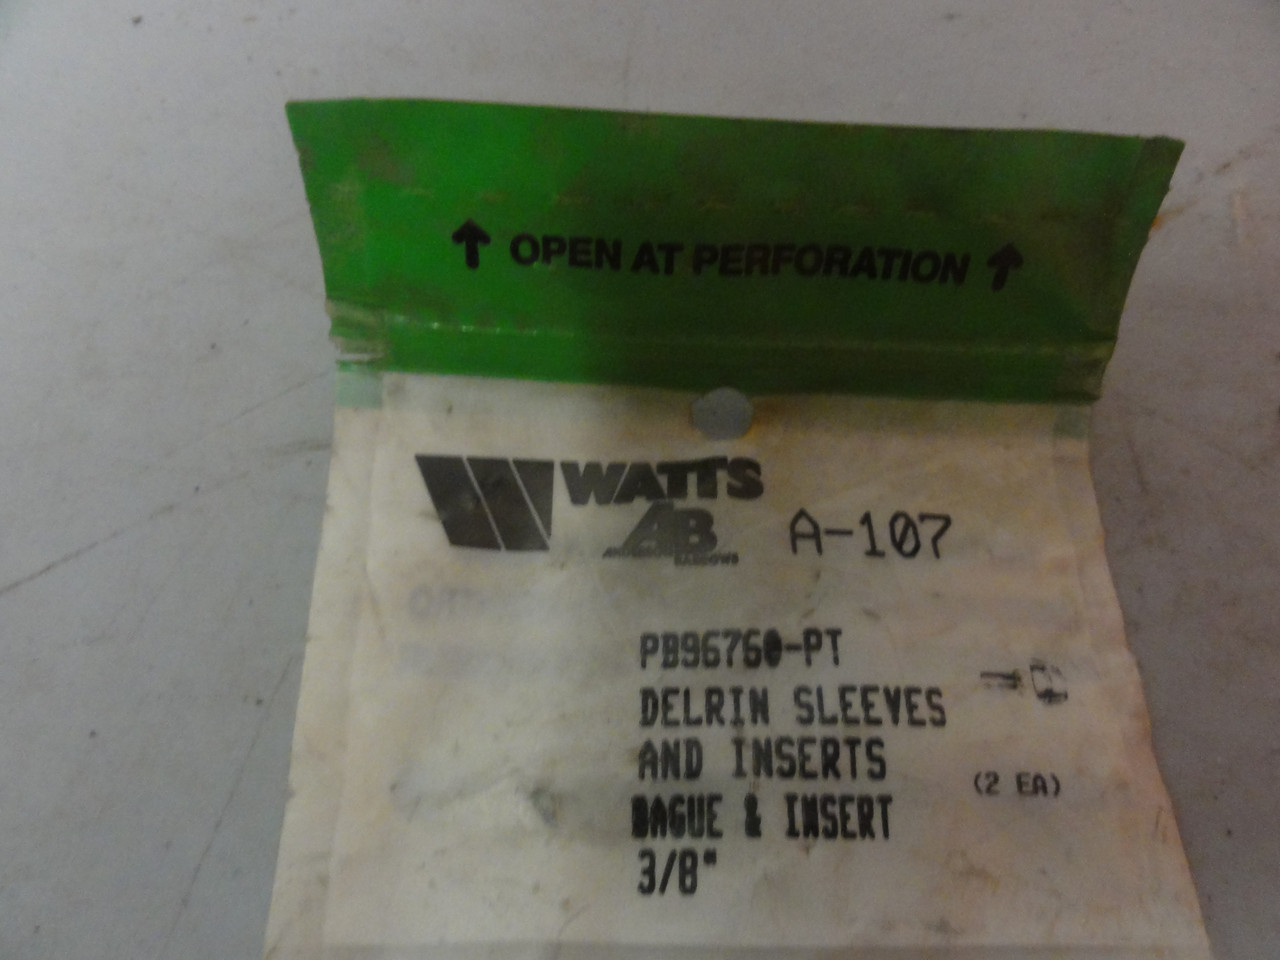 Watts Anderson Barrows A-107 Brass Insert and Delrin Sleeve 3/8" OD New